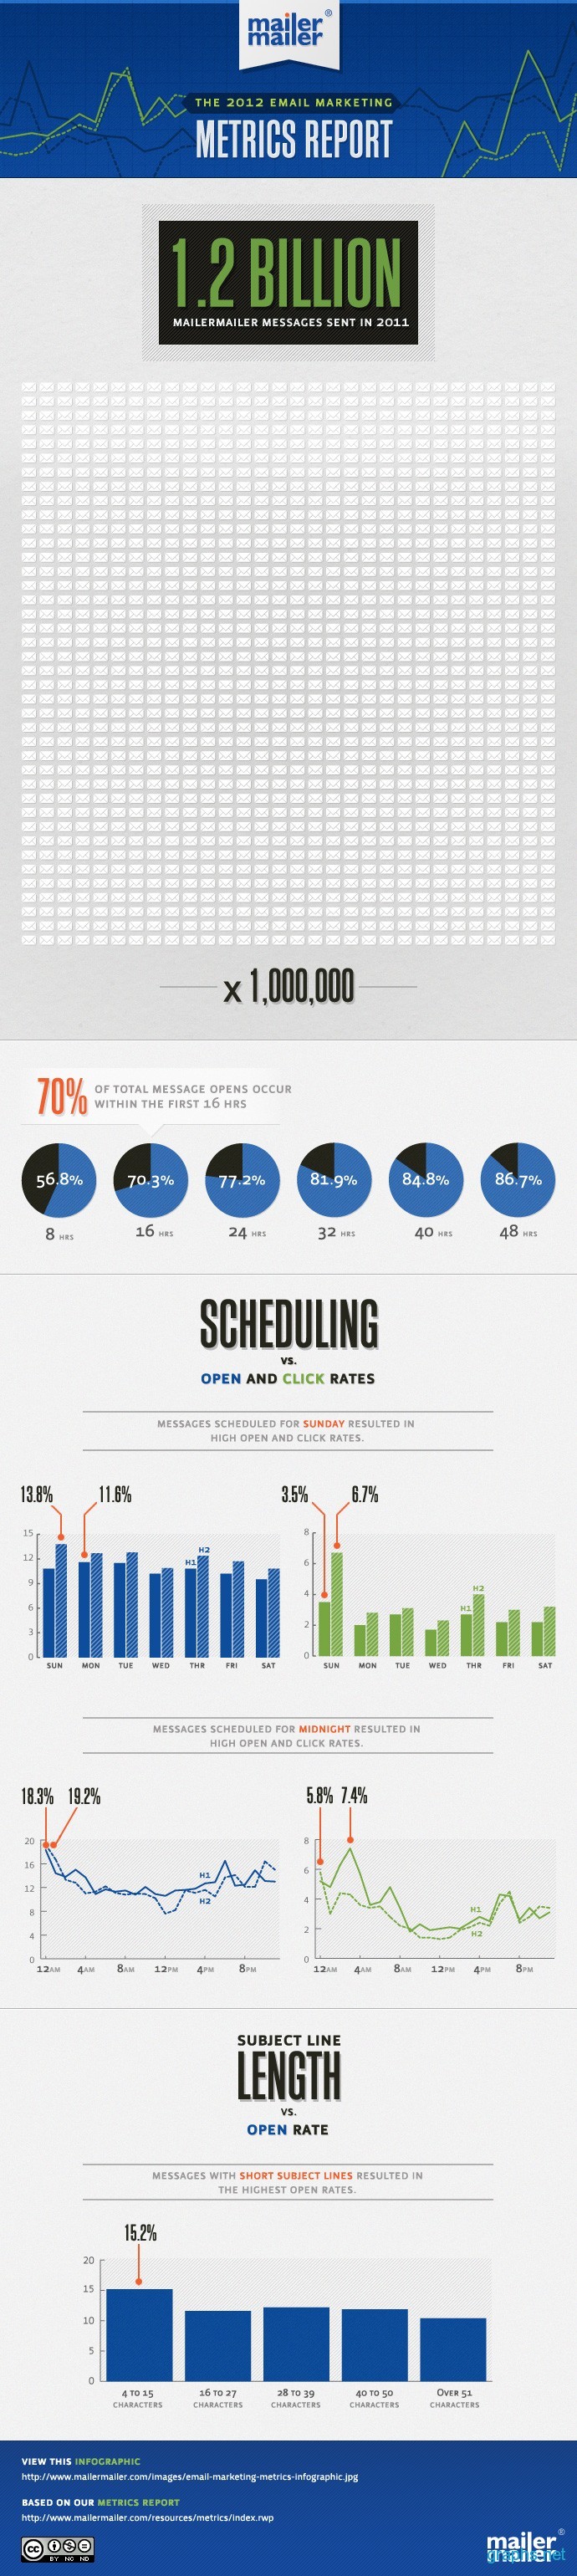 Current Email Marketing Trends and Benchmarks